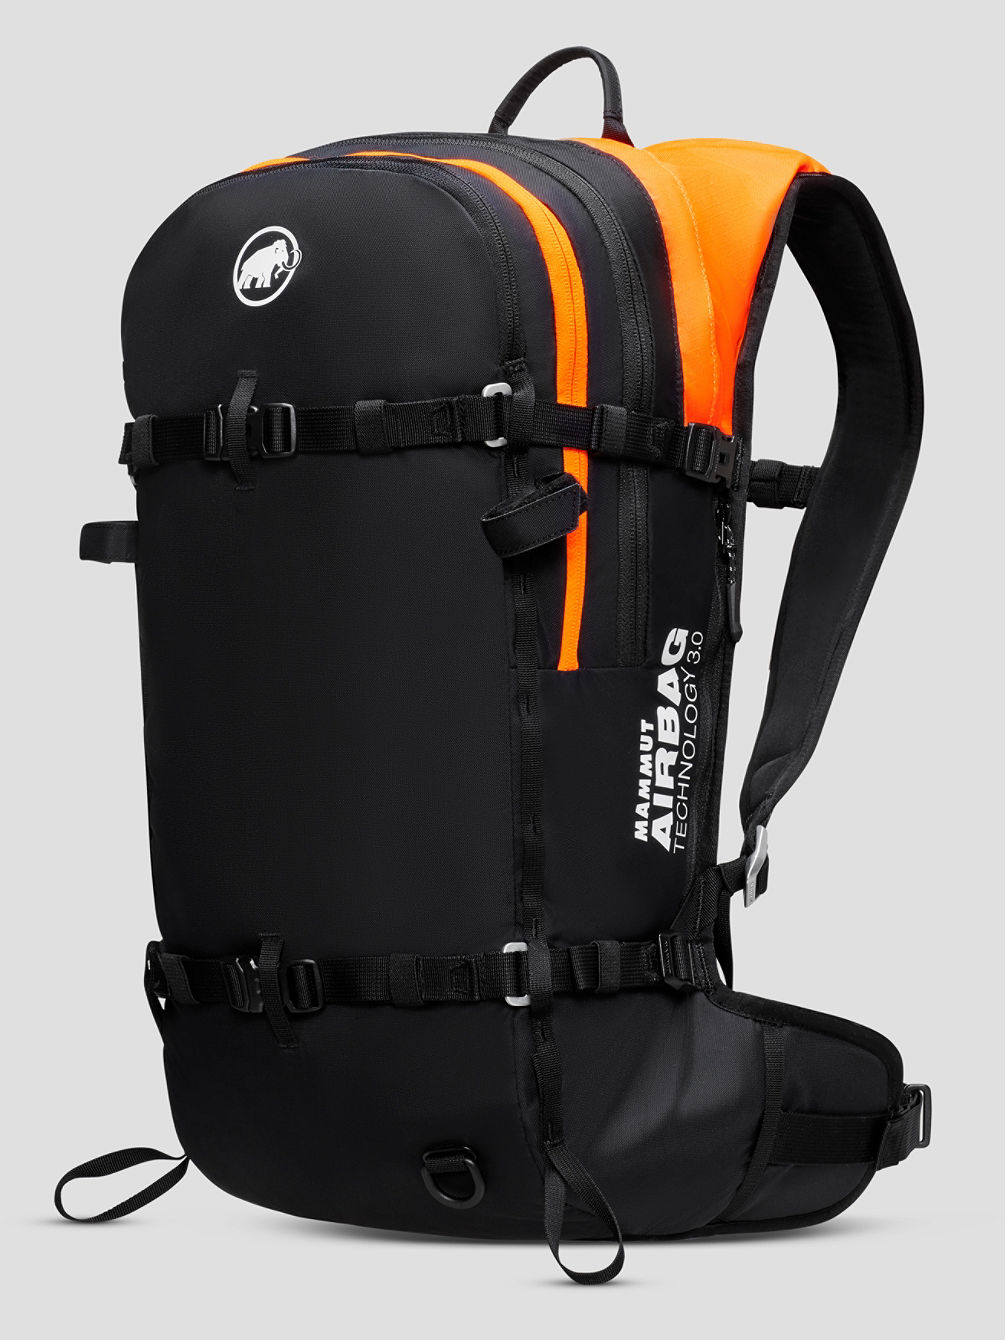 Free 22 Removable Airbag 3.0 Backpack